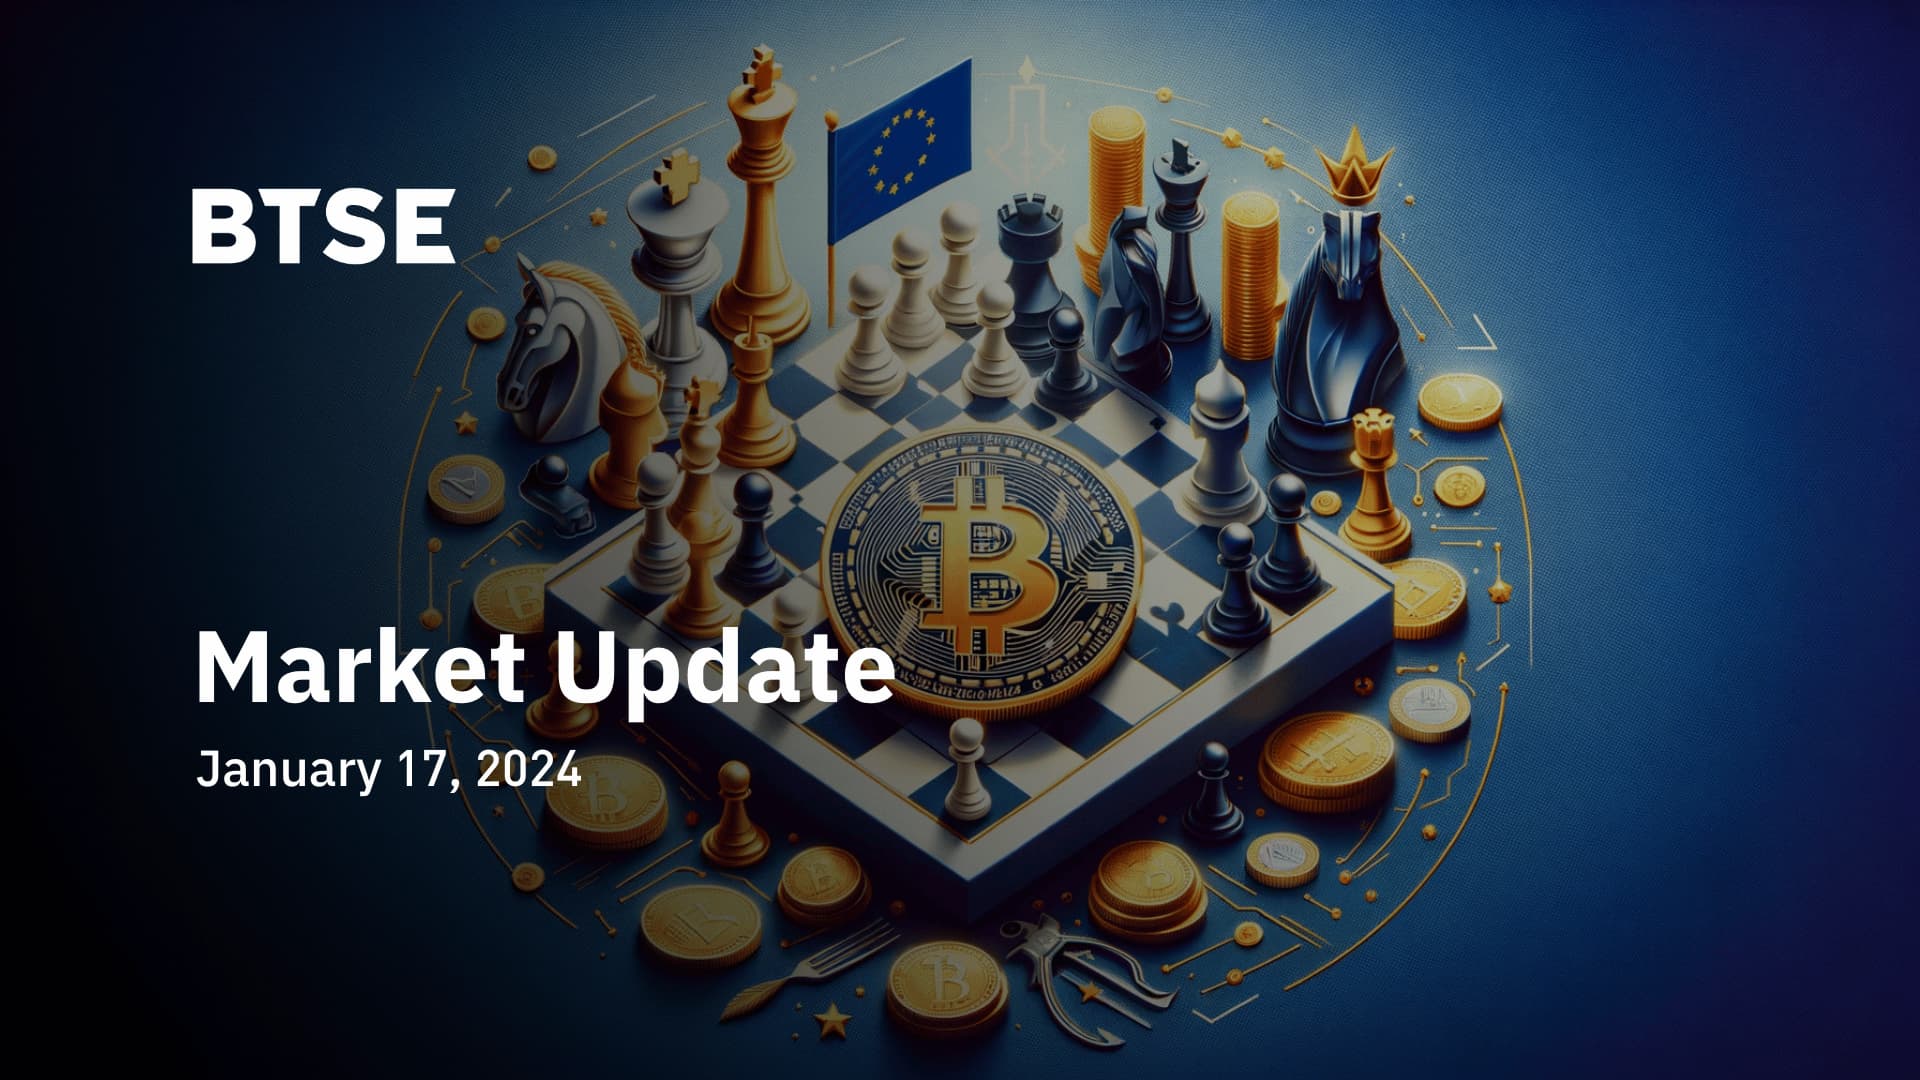 Spot ETF Dominance, Chess in the Web3 Realm, and EU's Crypto Compliance Push